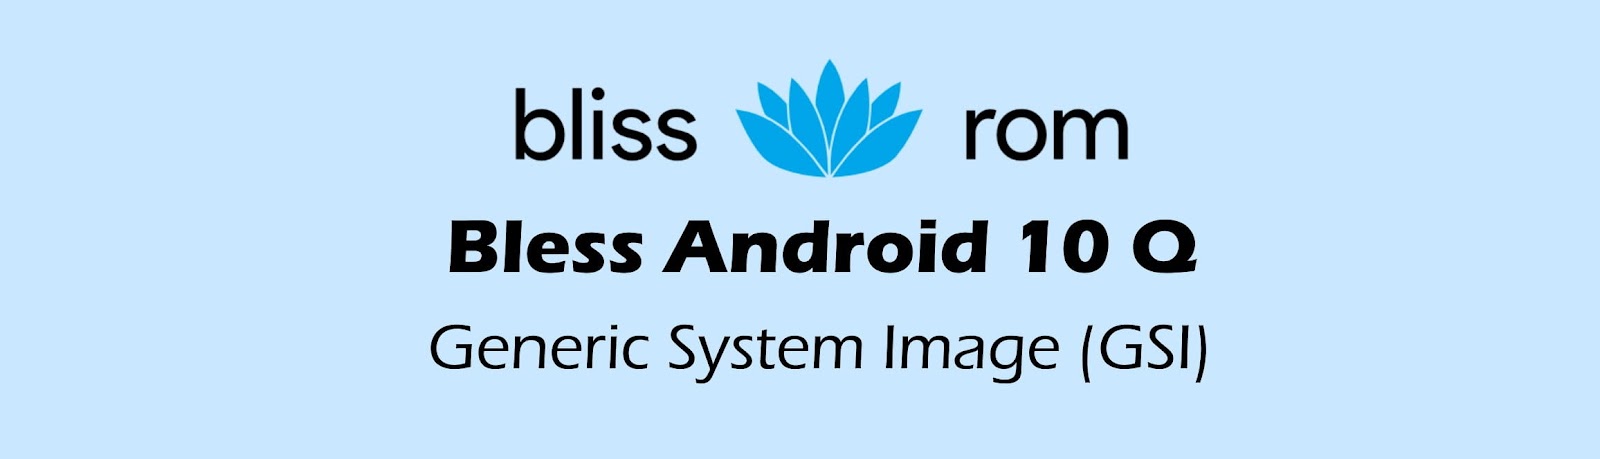 Bless - Bliss ROM Android 10 Generic System Image Illustration Banner